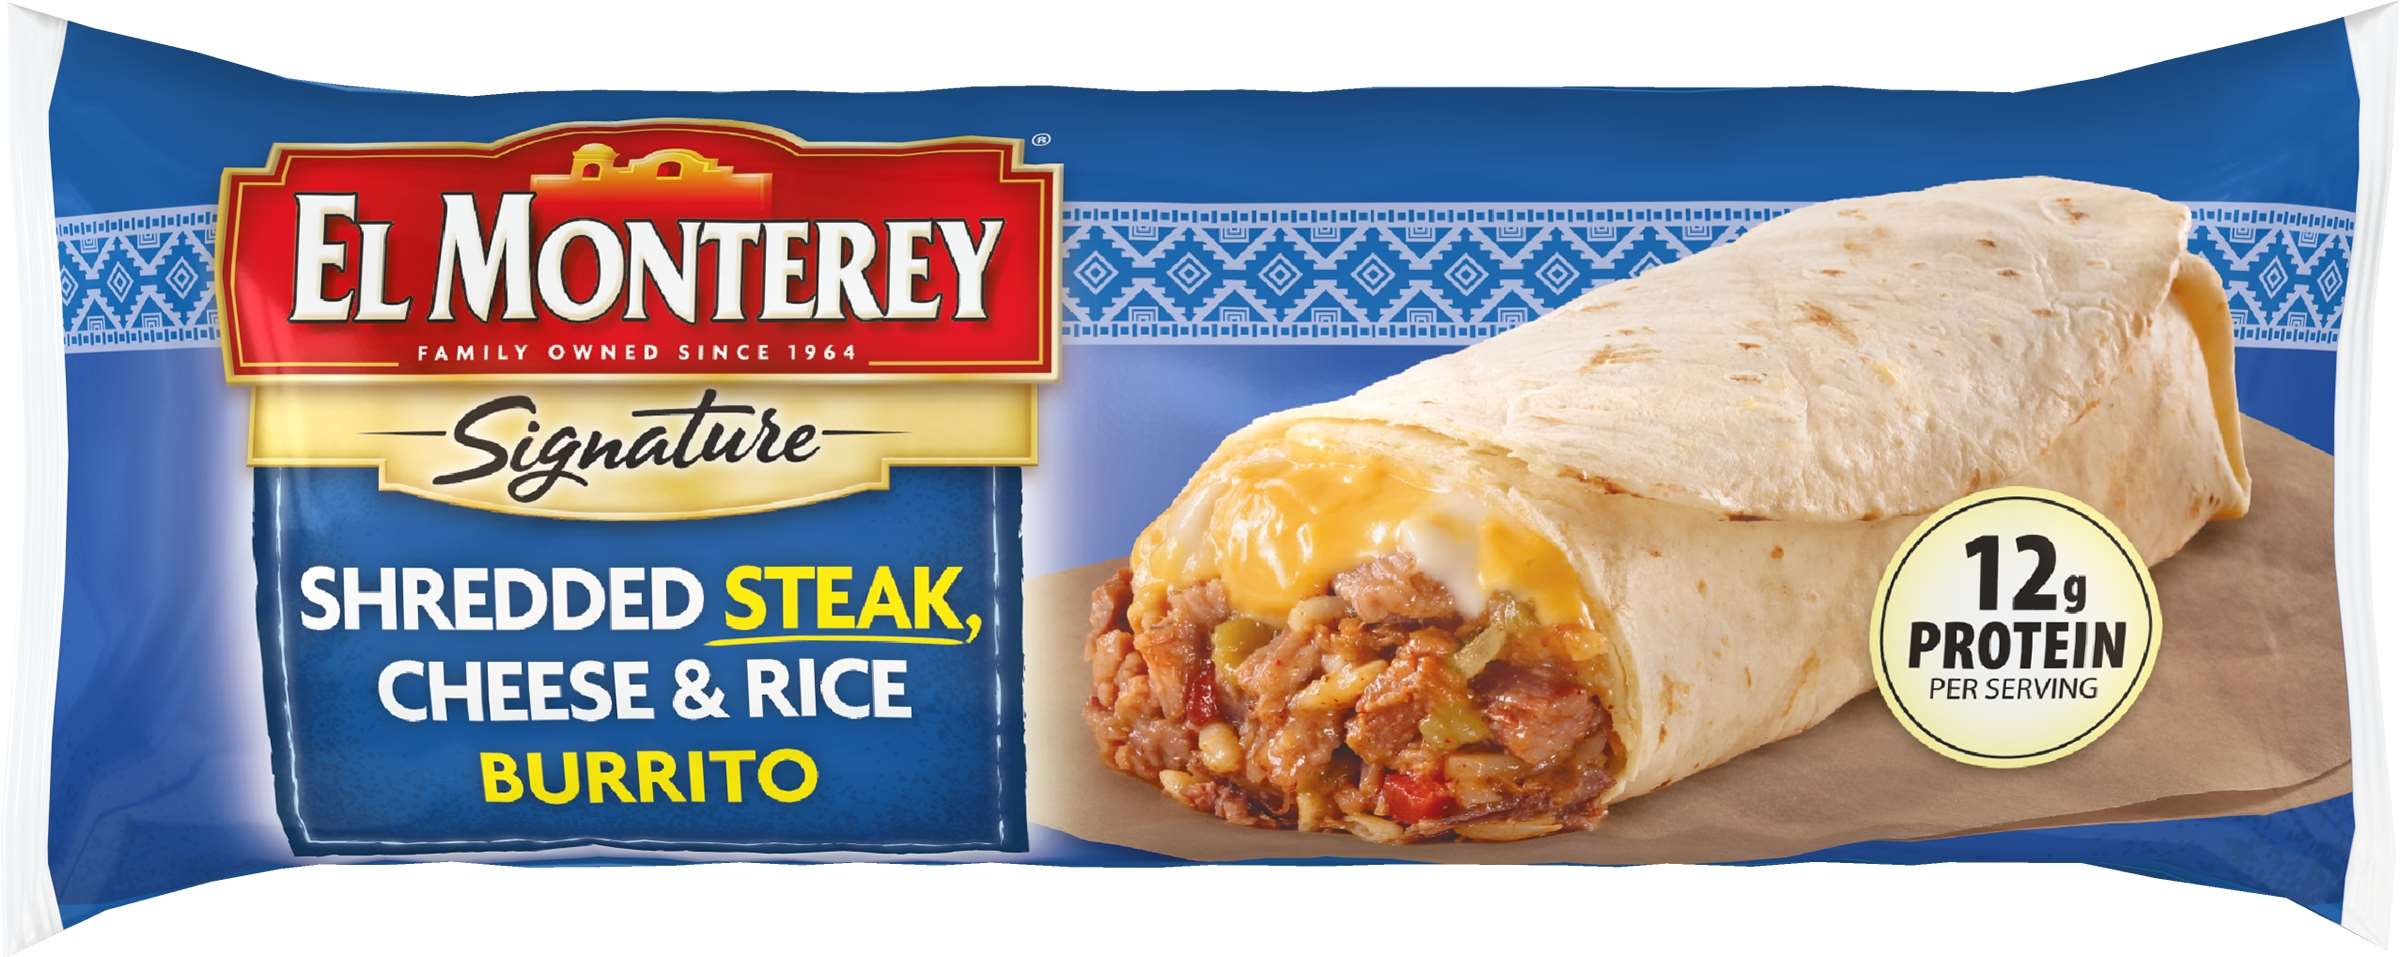 Burrito Shredded Seak and Three Cheese 24/5oz - Sold by PACK